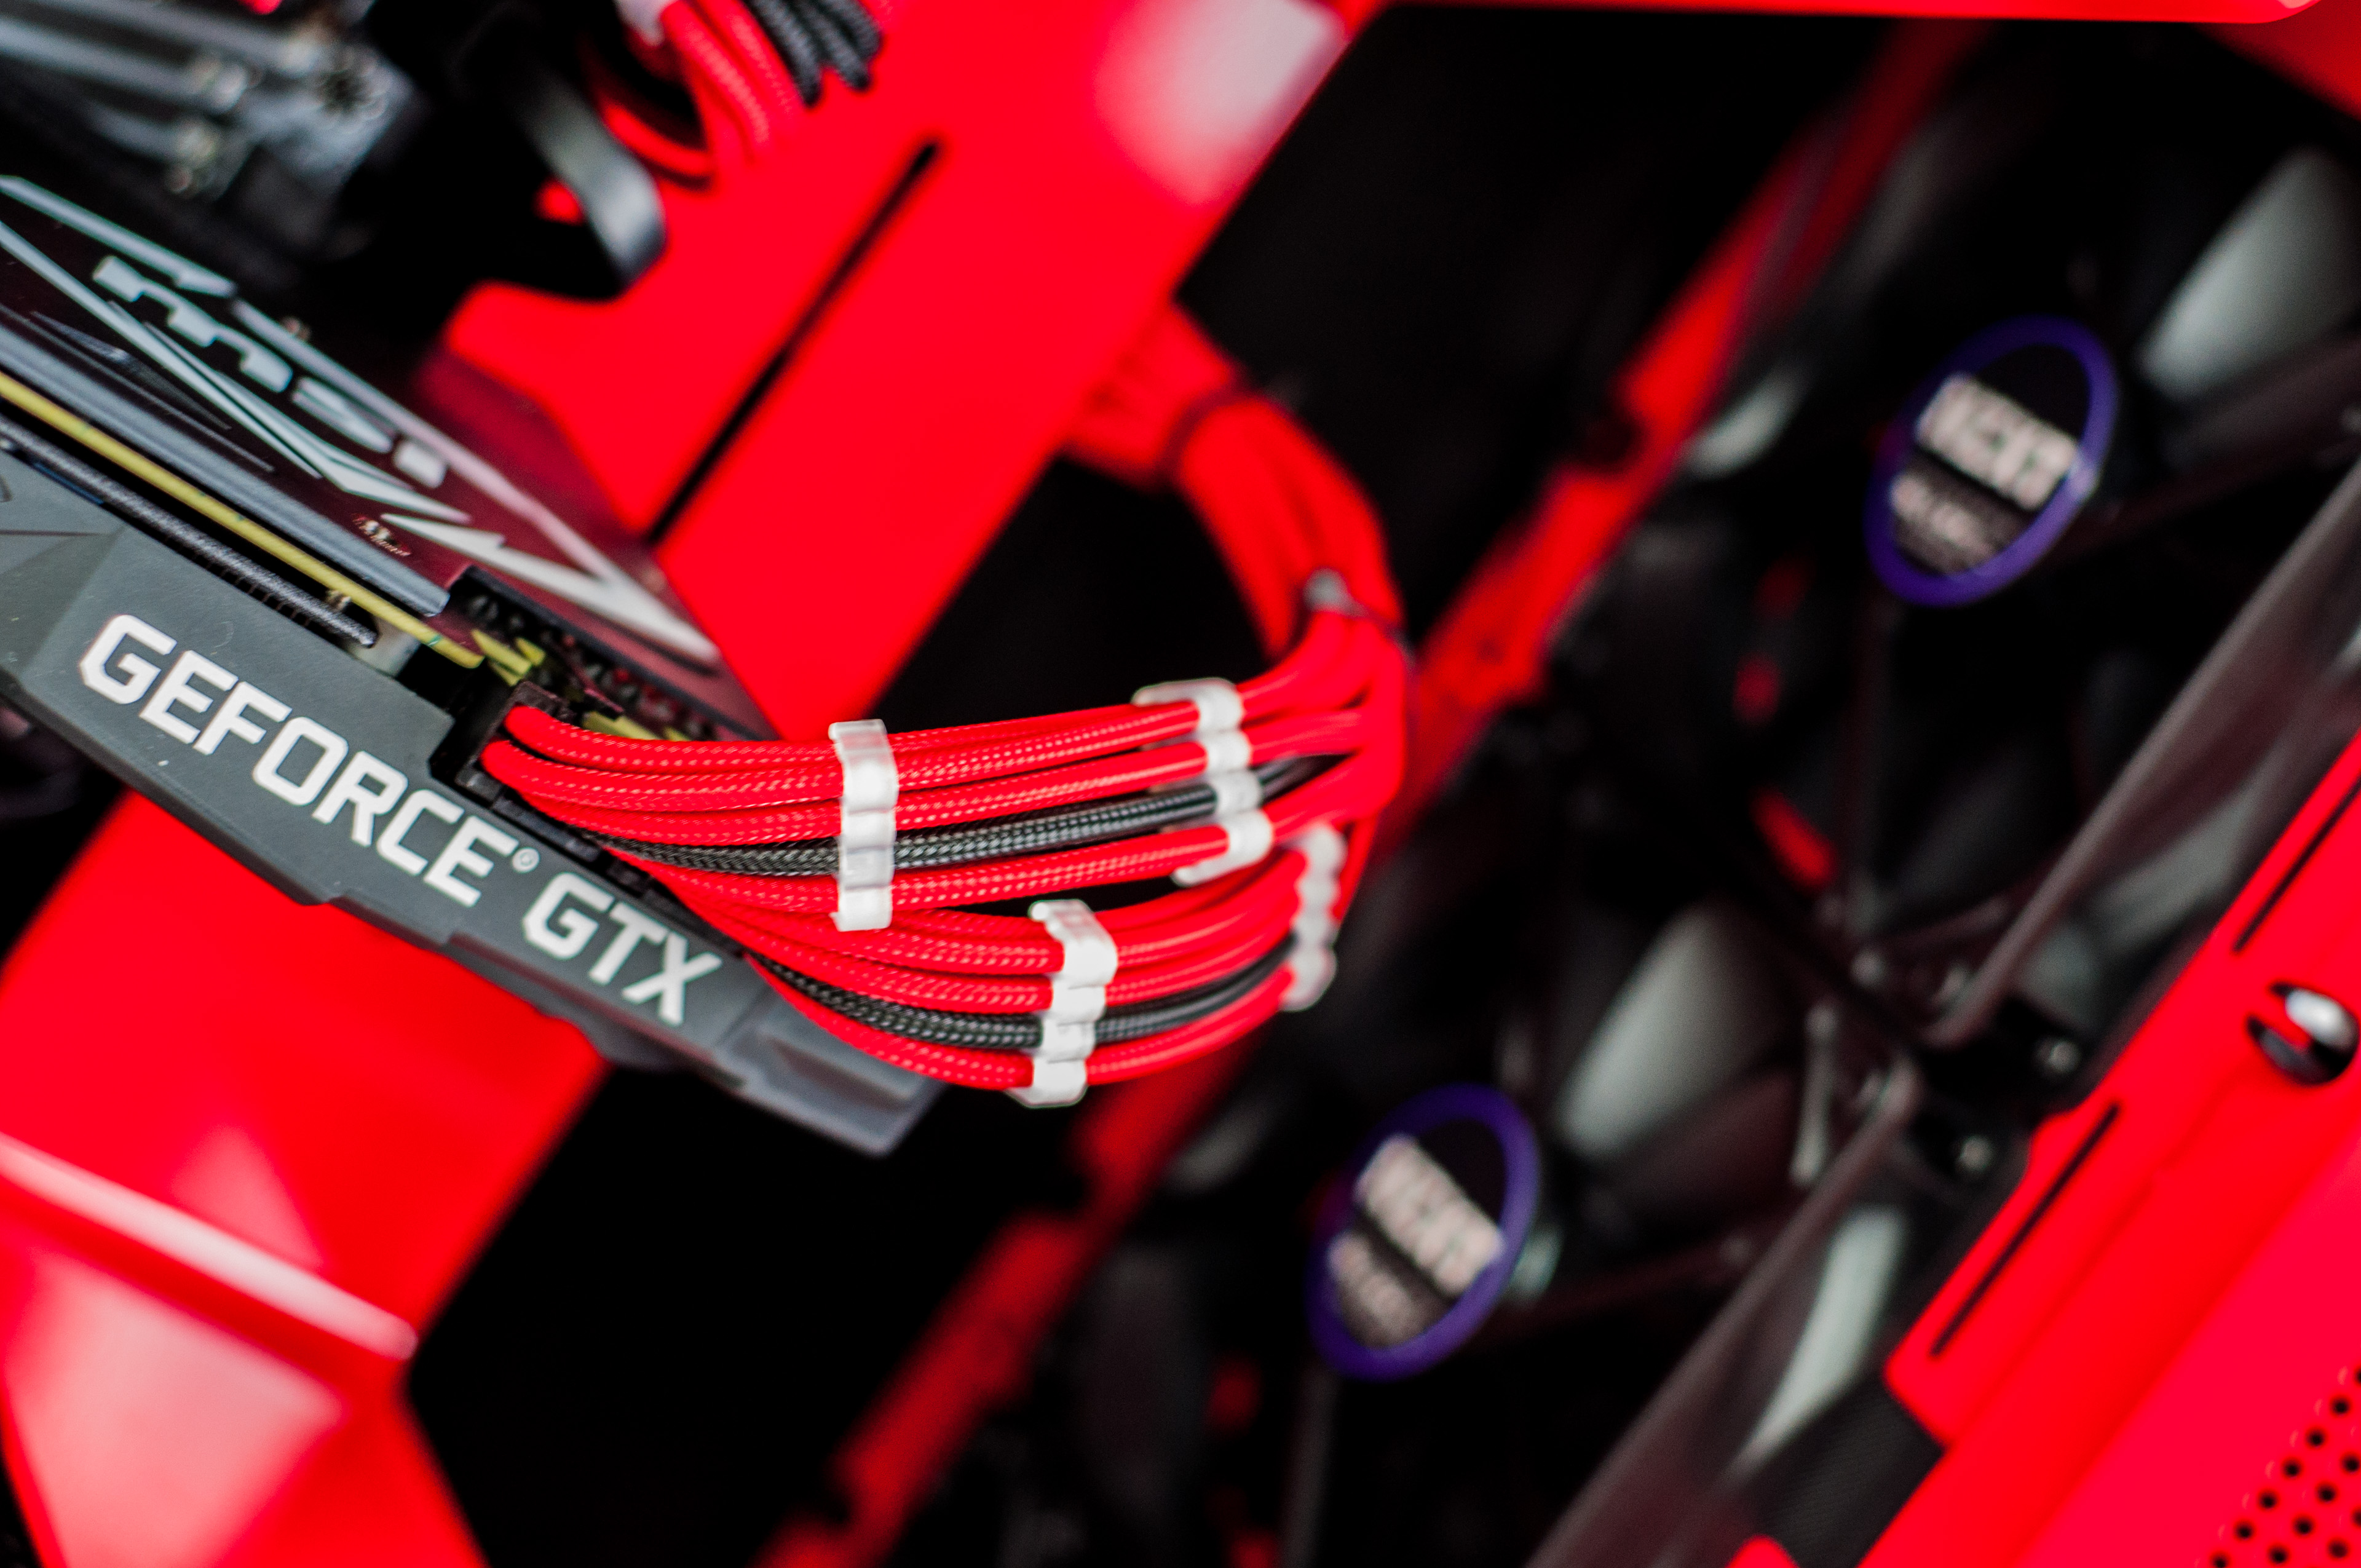 Valkyrie Gaming PC in NZXT H700 Black & Red